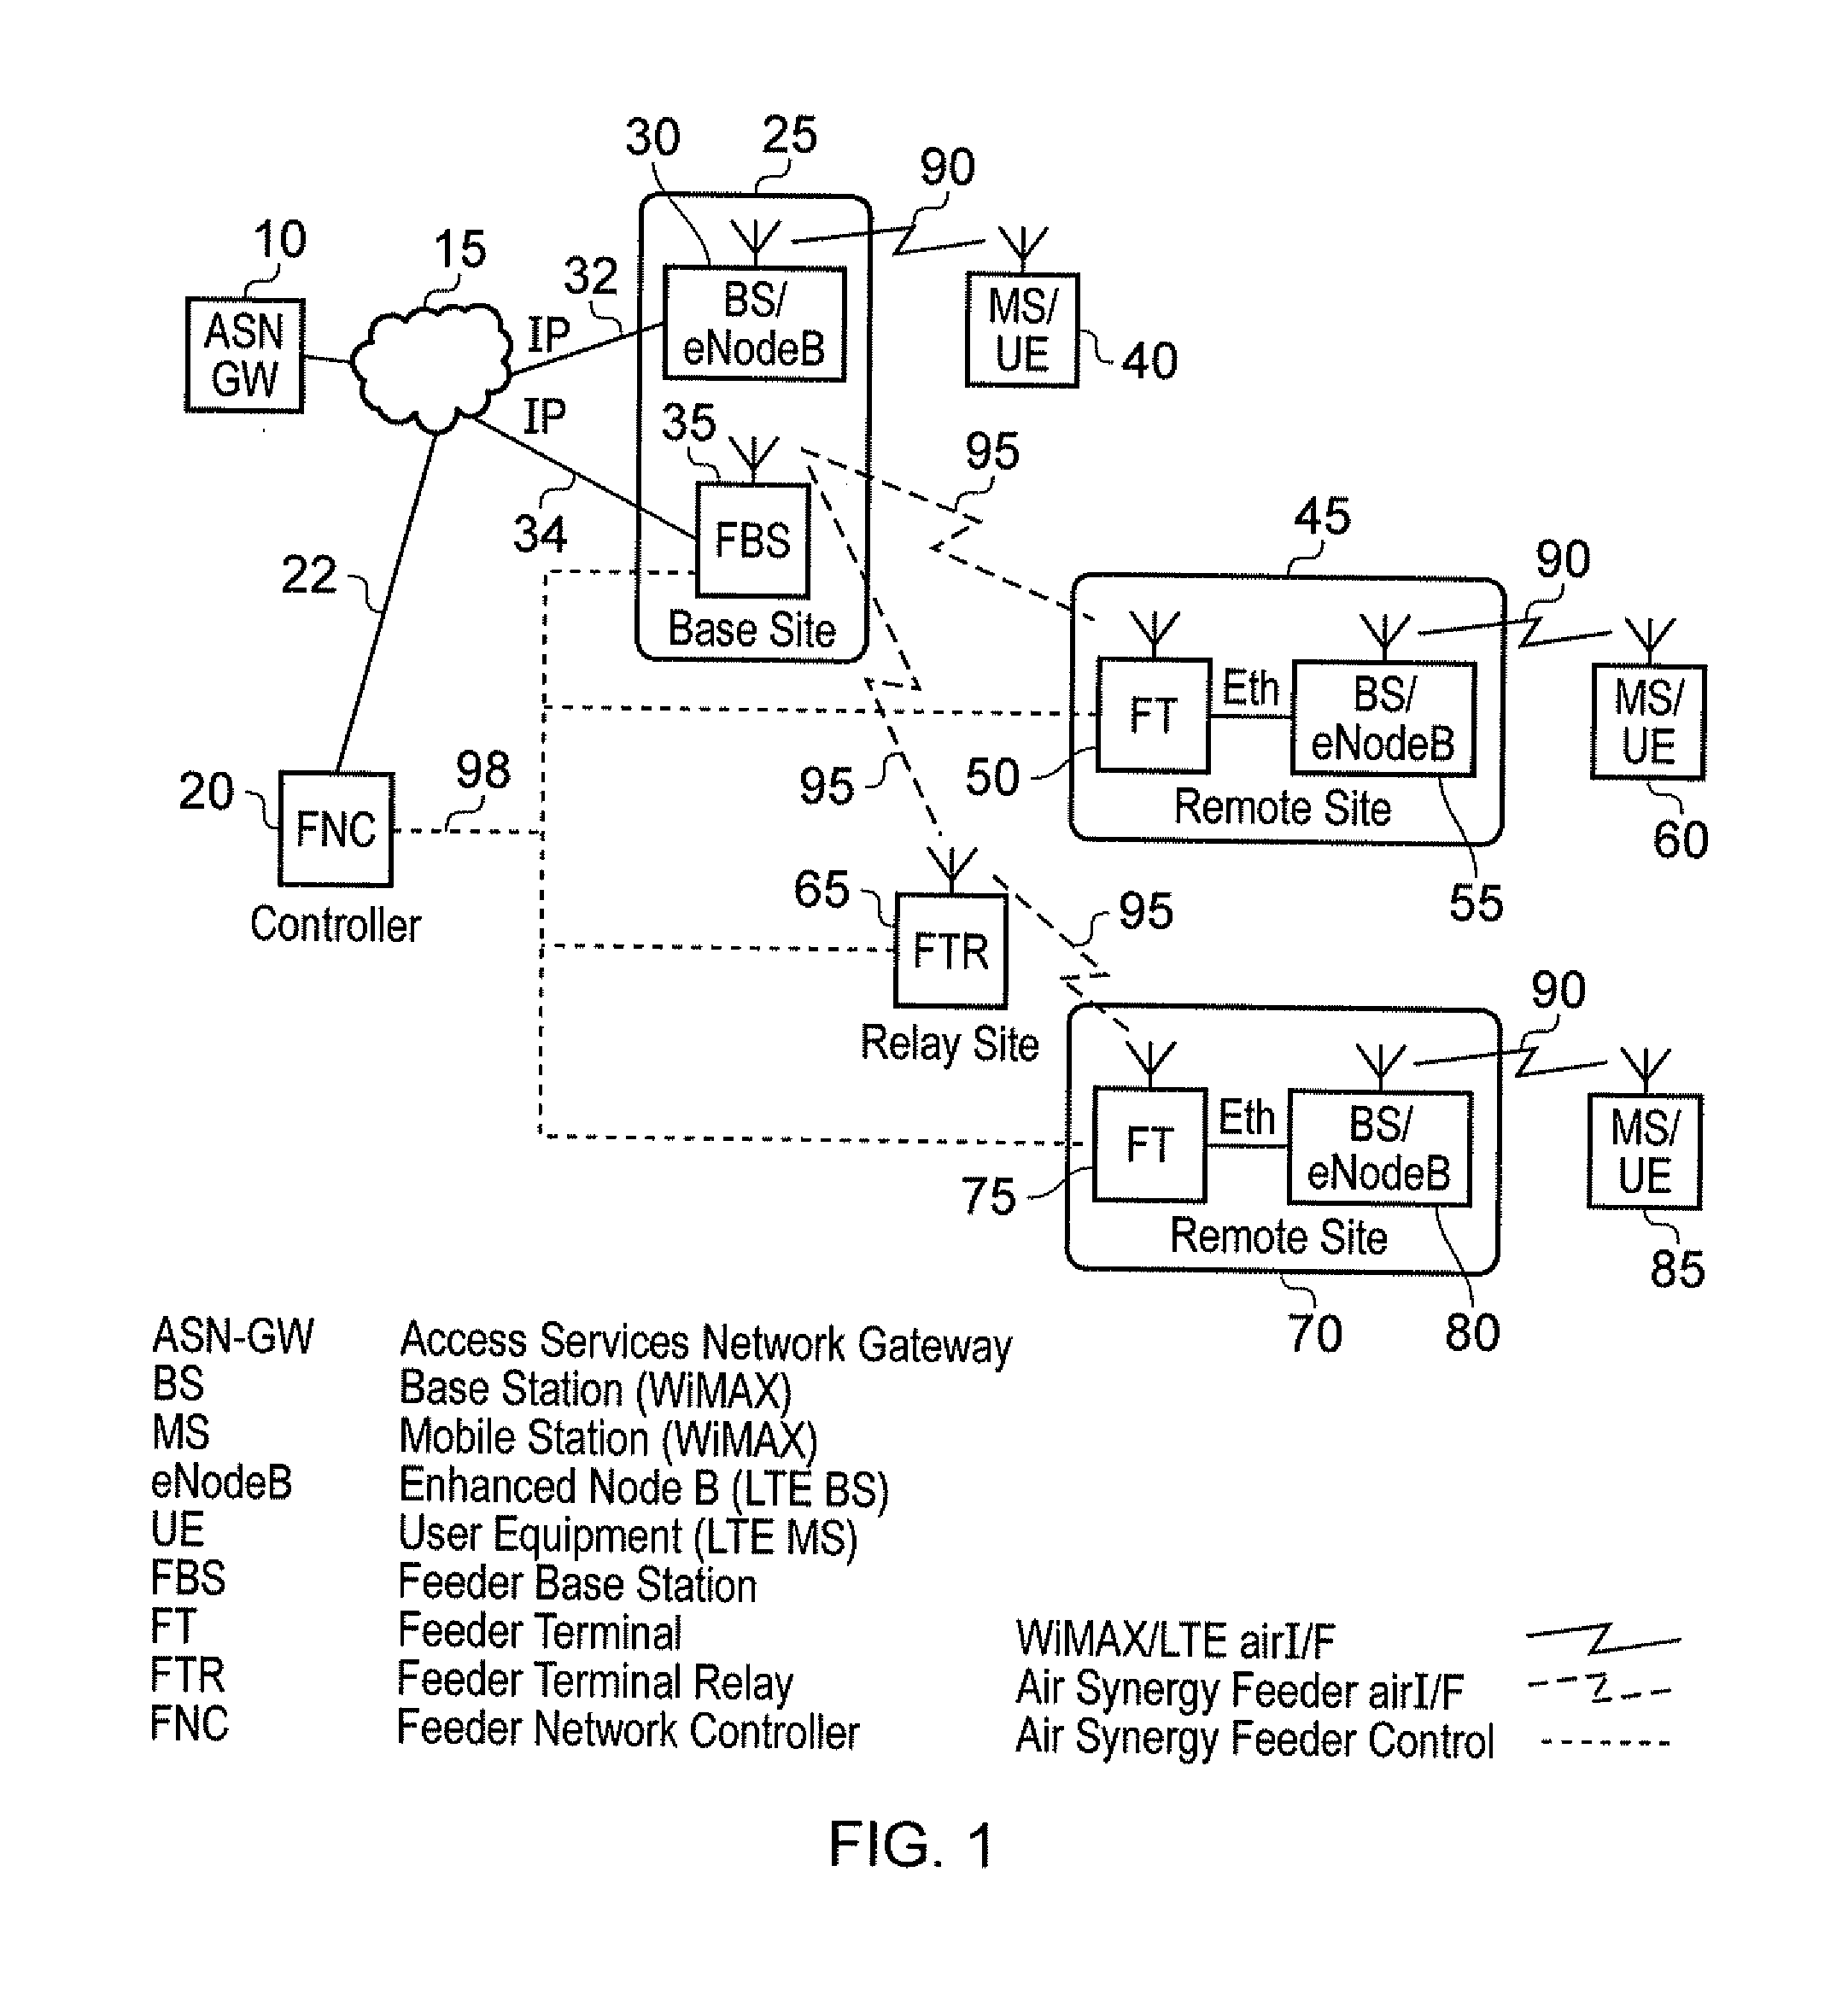 Apparatus and method for controlling a wireless feeder network